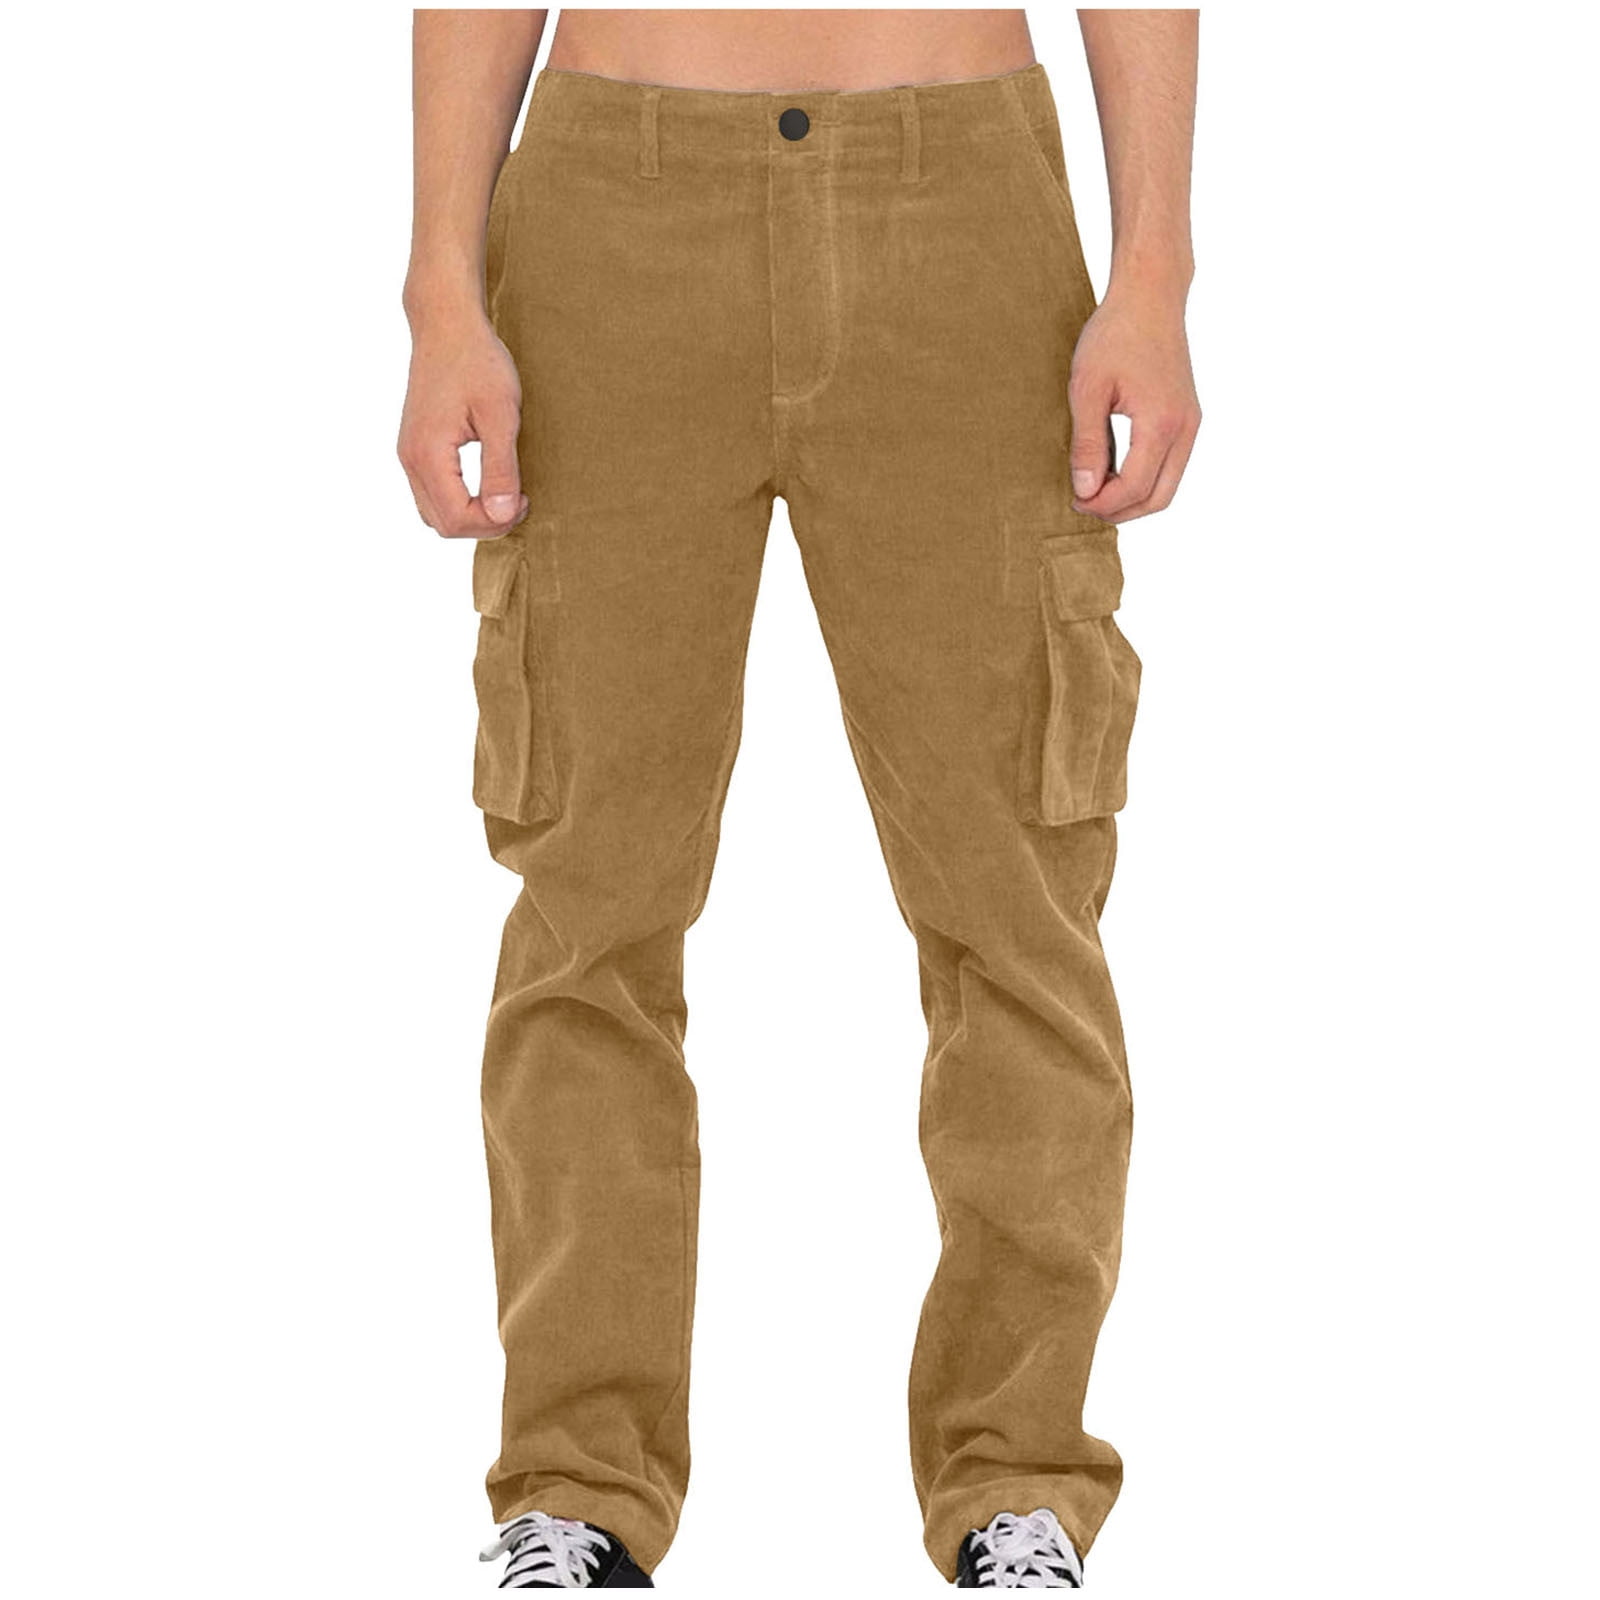 Hfyihgf Mens Corduroy Cargo Pants Athletic Casual Loose Straight-Fit  Lightweight Workwear Sport Outdoor Trousers with Multi Pockets(Khaki,L)